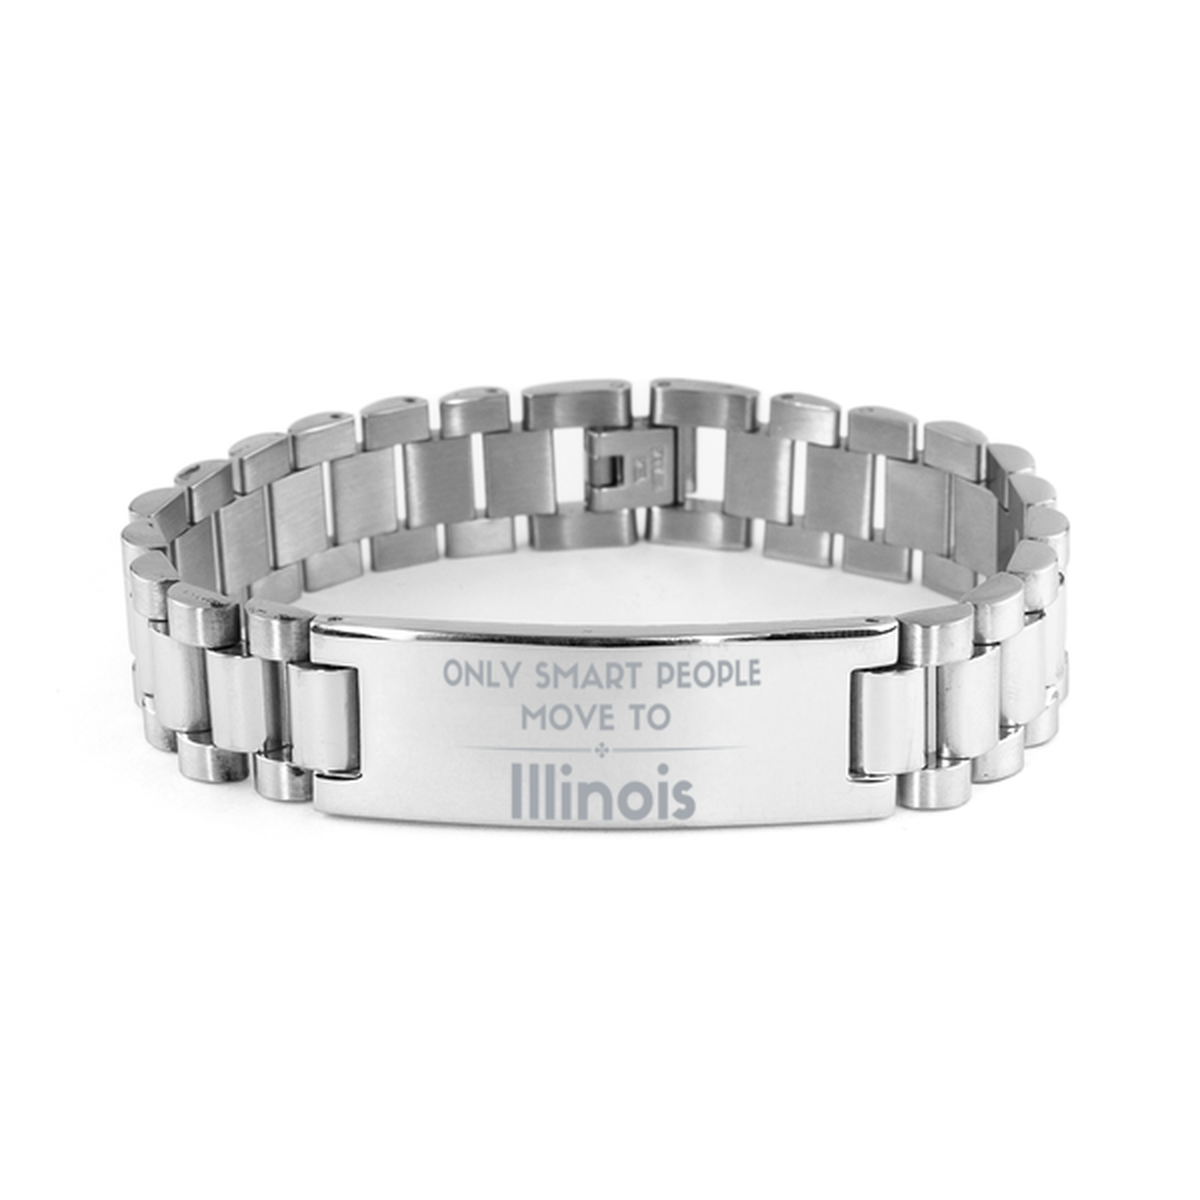 Only smart people move to Illinois Ladder Stainless Steel Bracelet, Gag Gifts For Illinois, Move to Illinois Gifts for Friends Coworker Funny Saying Quote